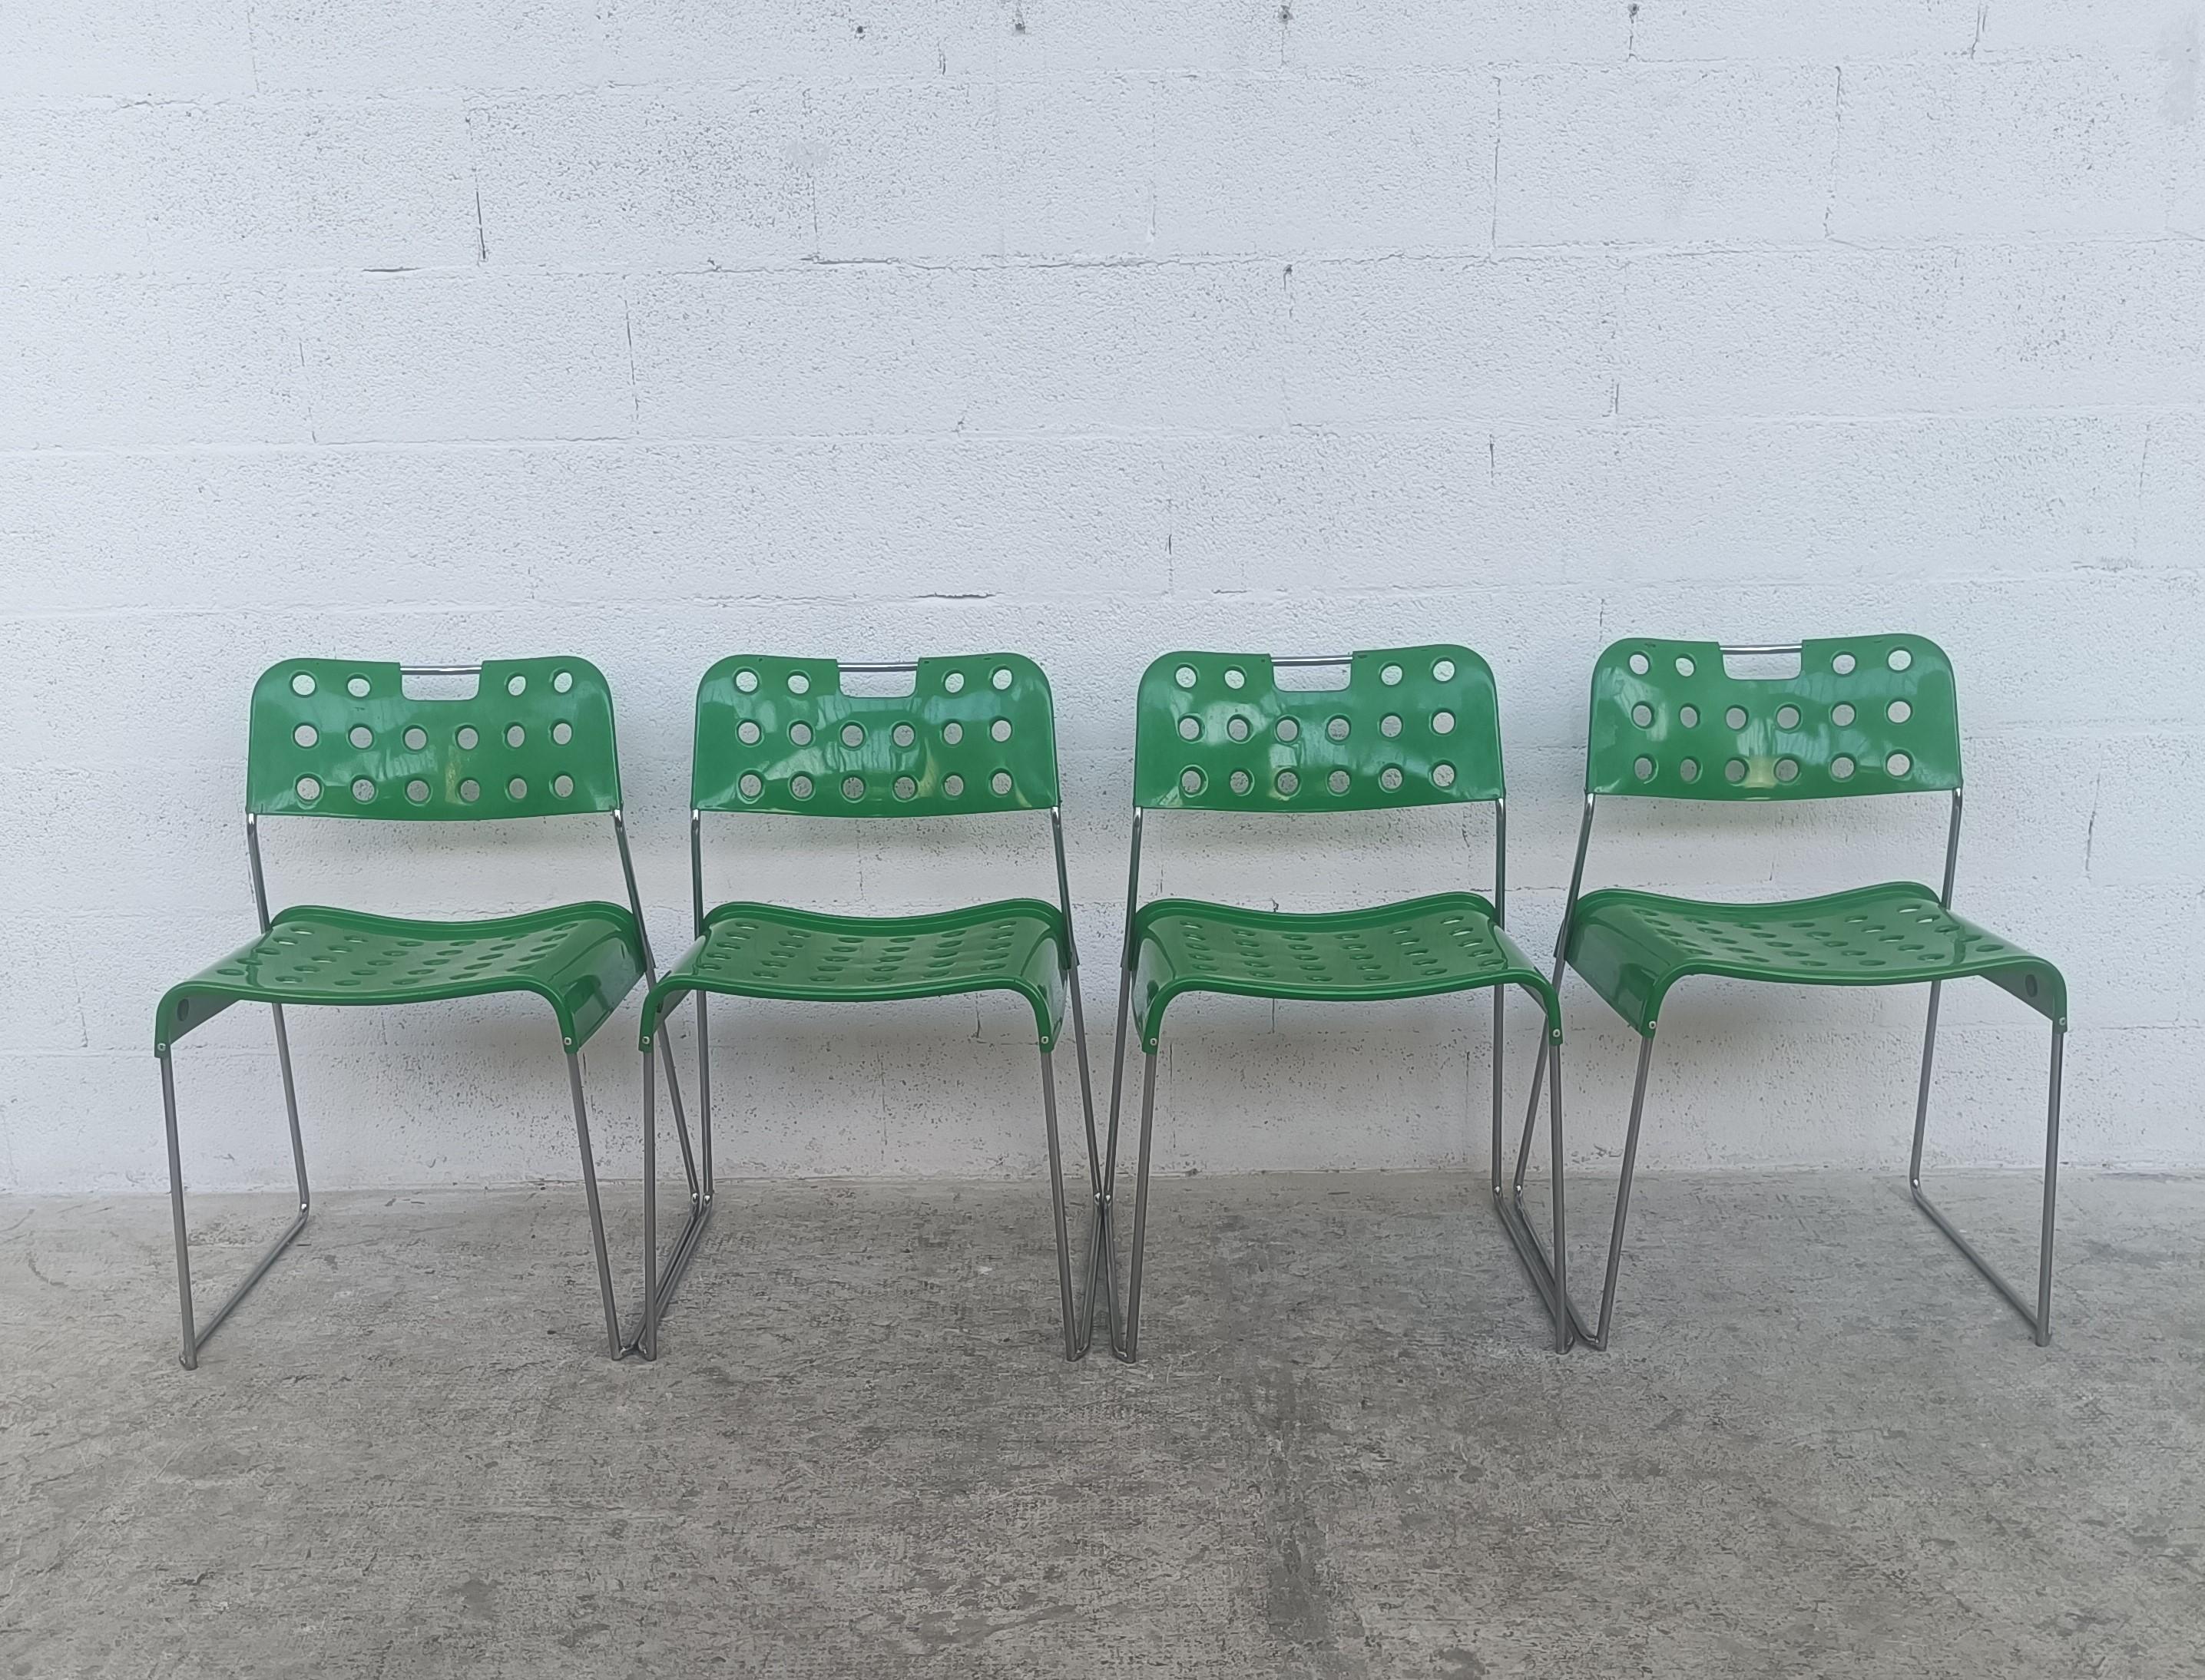 Italian 4 Green Omkstak Stackable Chairs by Rodney Kinsman for Bieffeplast 70s For Sale